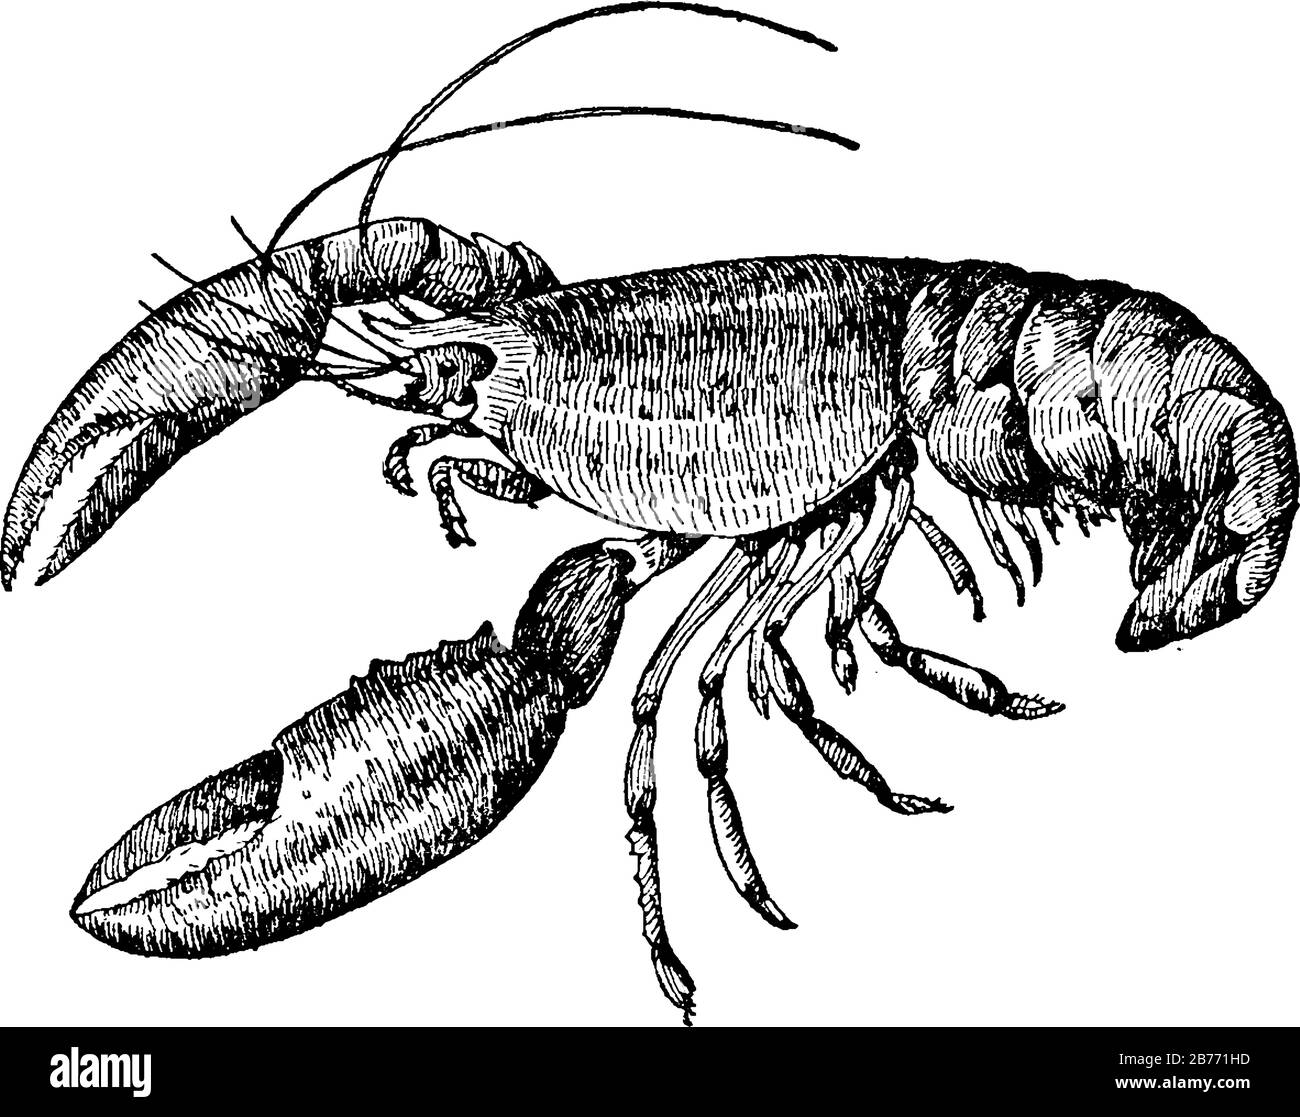 A crustacean has long bodies with muscular tails, and live in crevices or burrows on the sea floor, three of their five pairs of legs have claws, vint Stock Vector